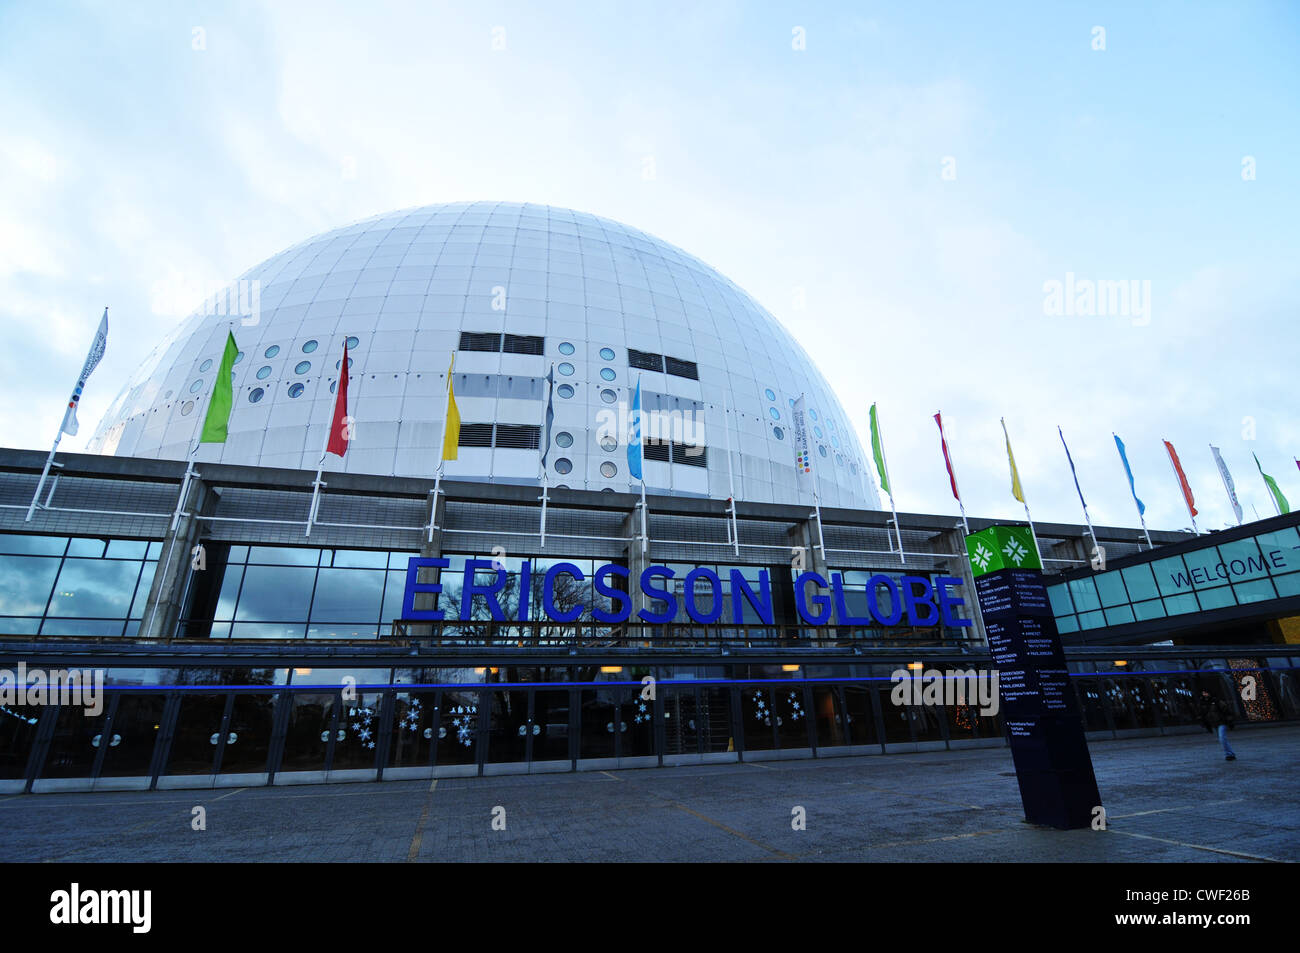 Stockholm, Sweden - 15 Dec, 2011: Architectural detail of the Ericsson Globe, the national indoor arena of Sweden Stock Photo